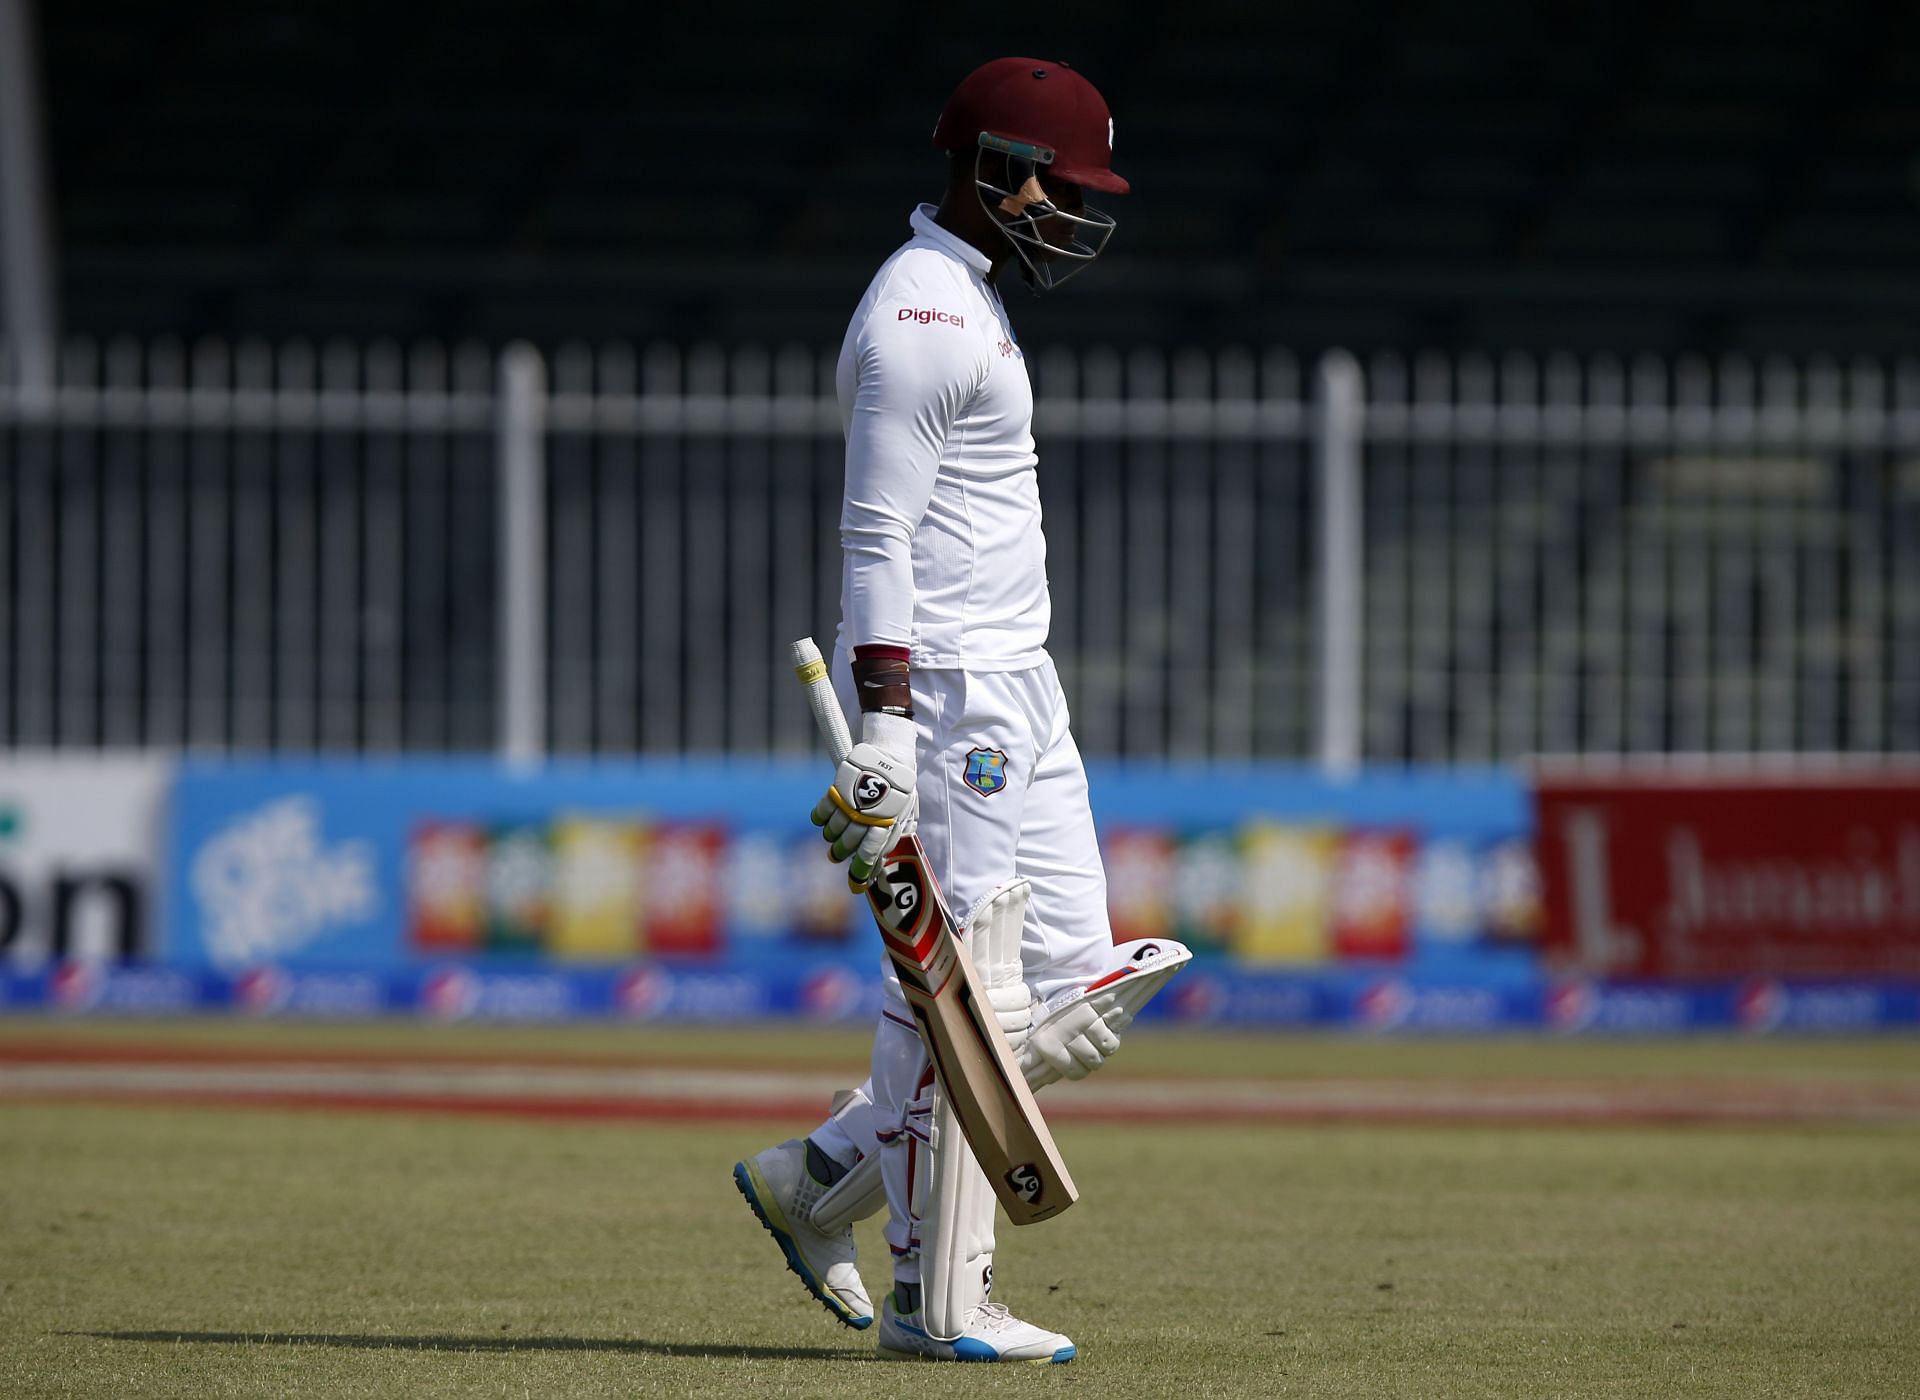 Marlon Samuels was undone by Ashwin a number of times. (Pic: Getty Images)